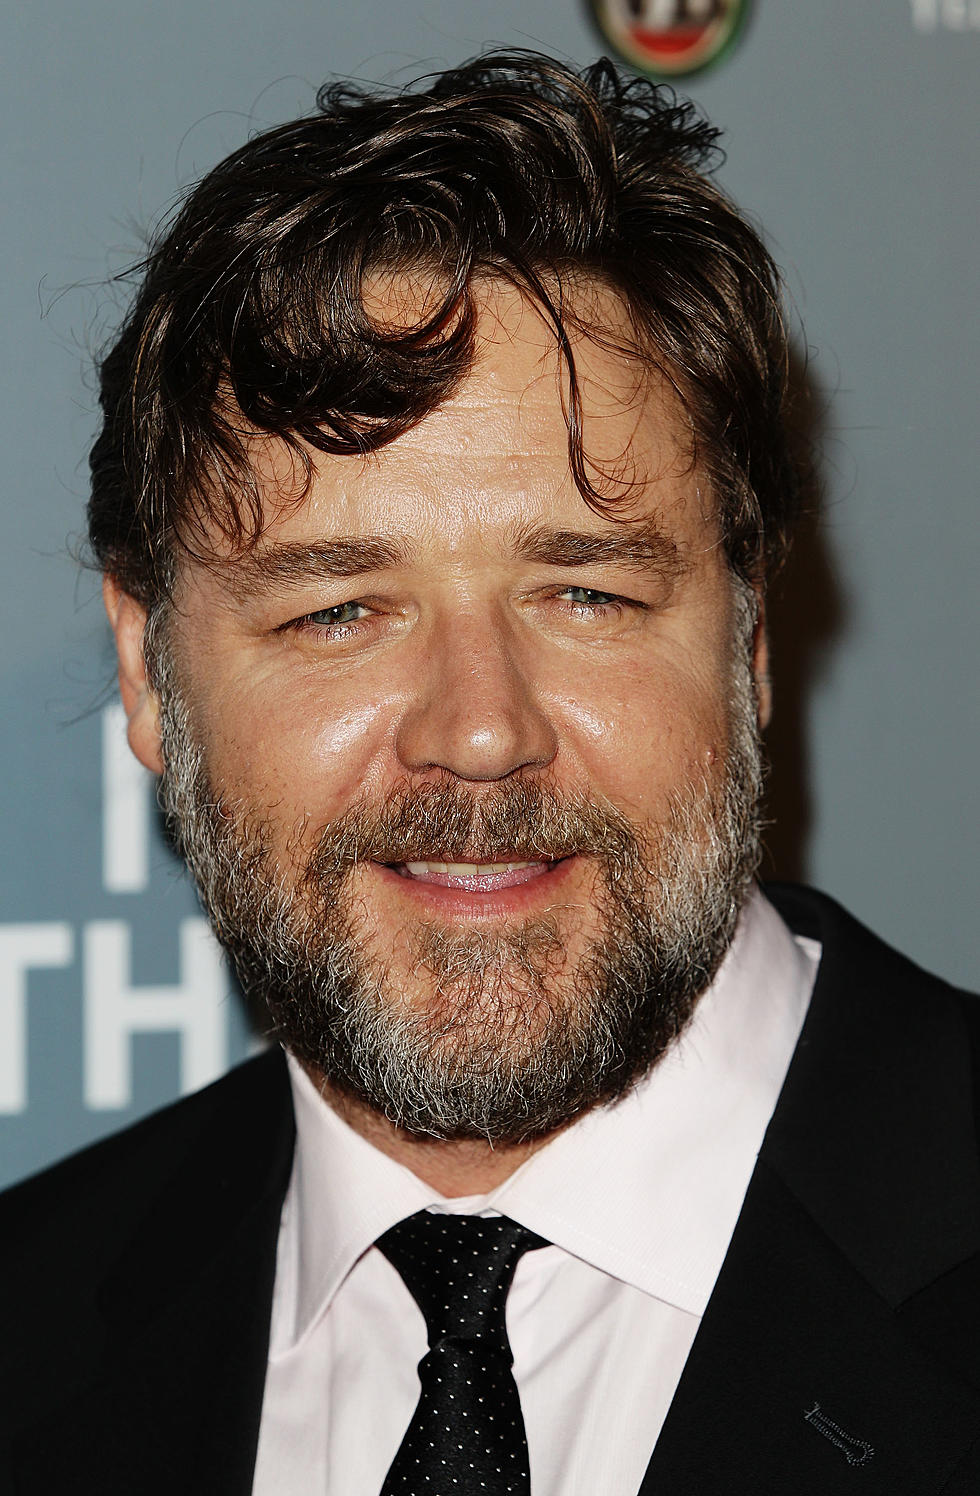 Russell Crowe Joins “The Man of Steel” Cast As Superman’s Father